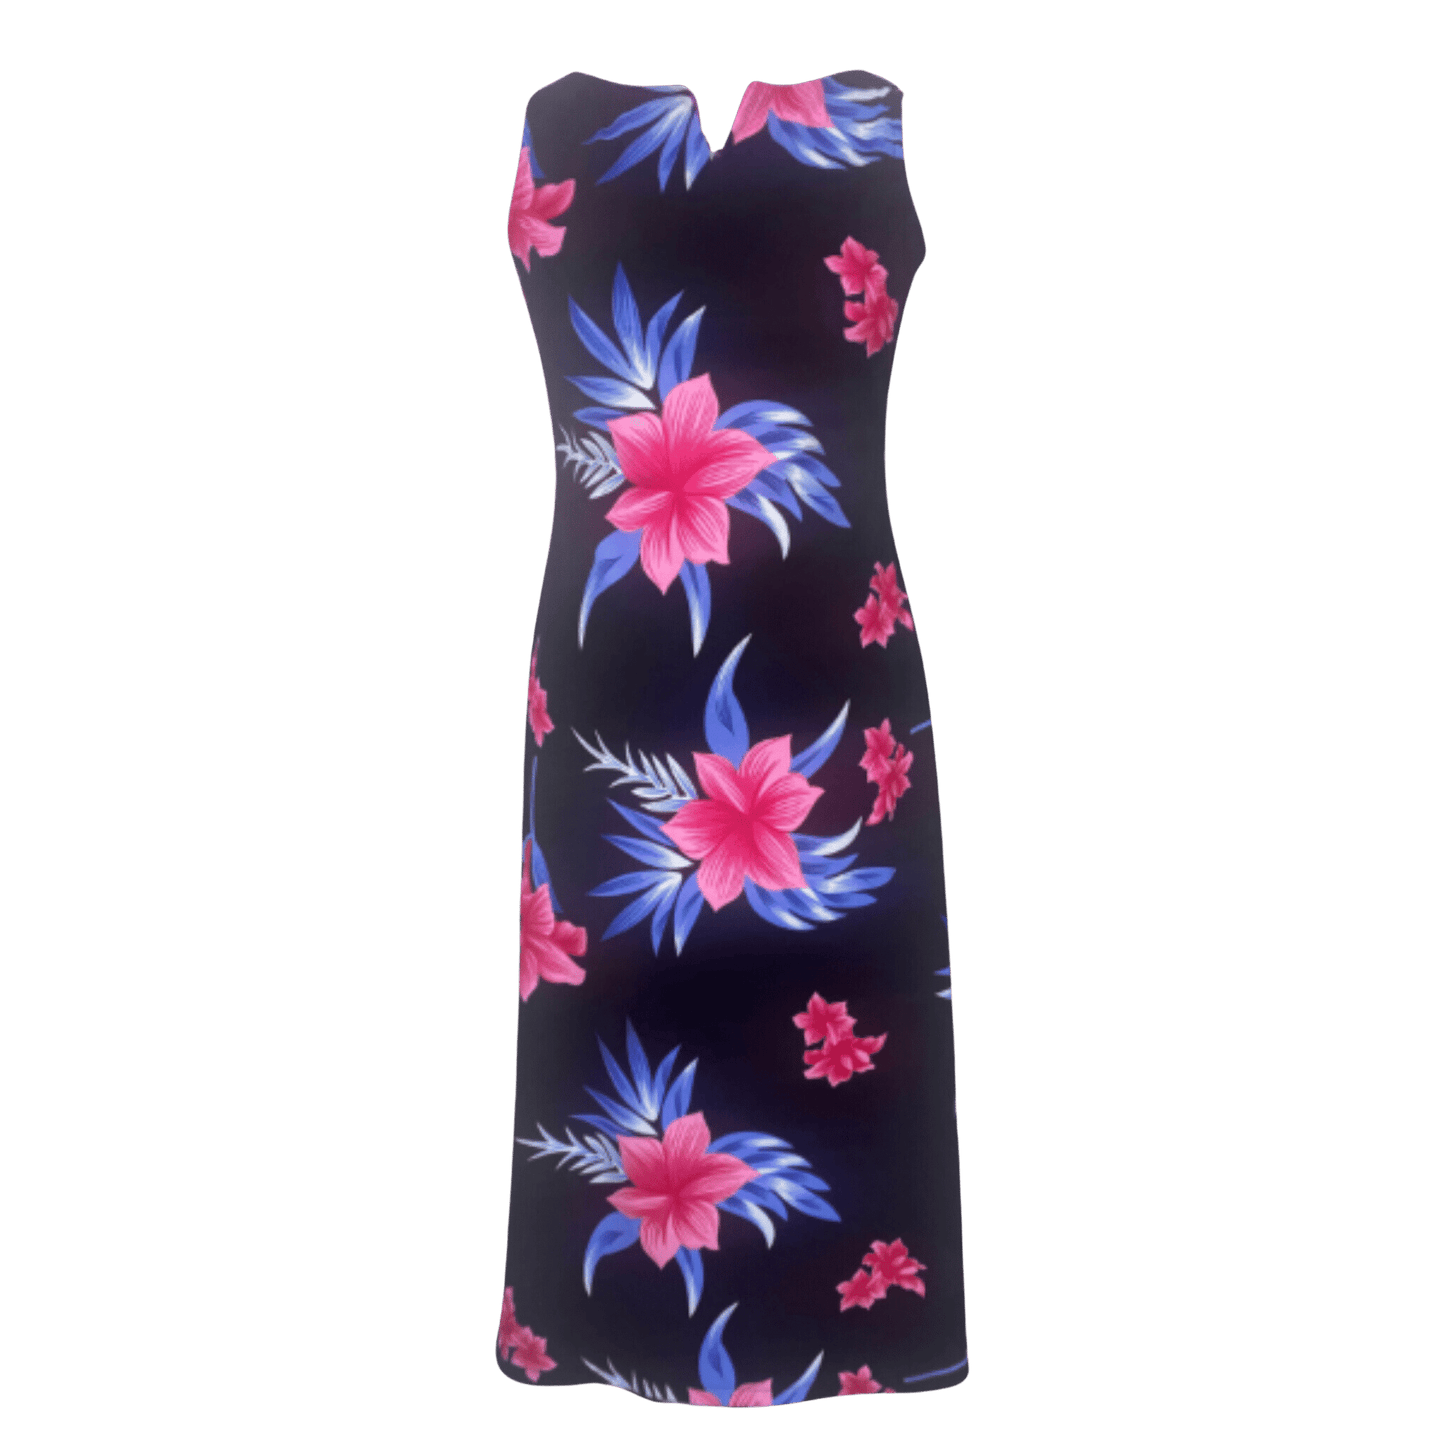 A Hawaiian inspired dress, black background with large pink hibiscus flowers and puple leaves